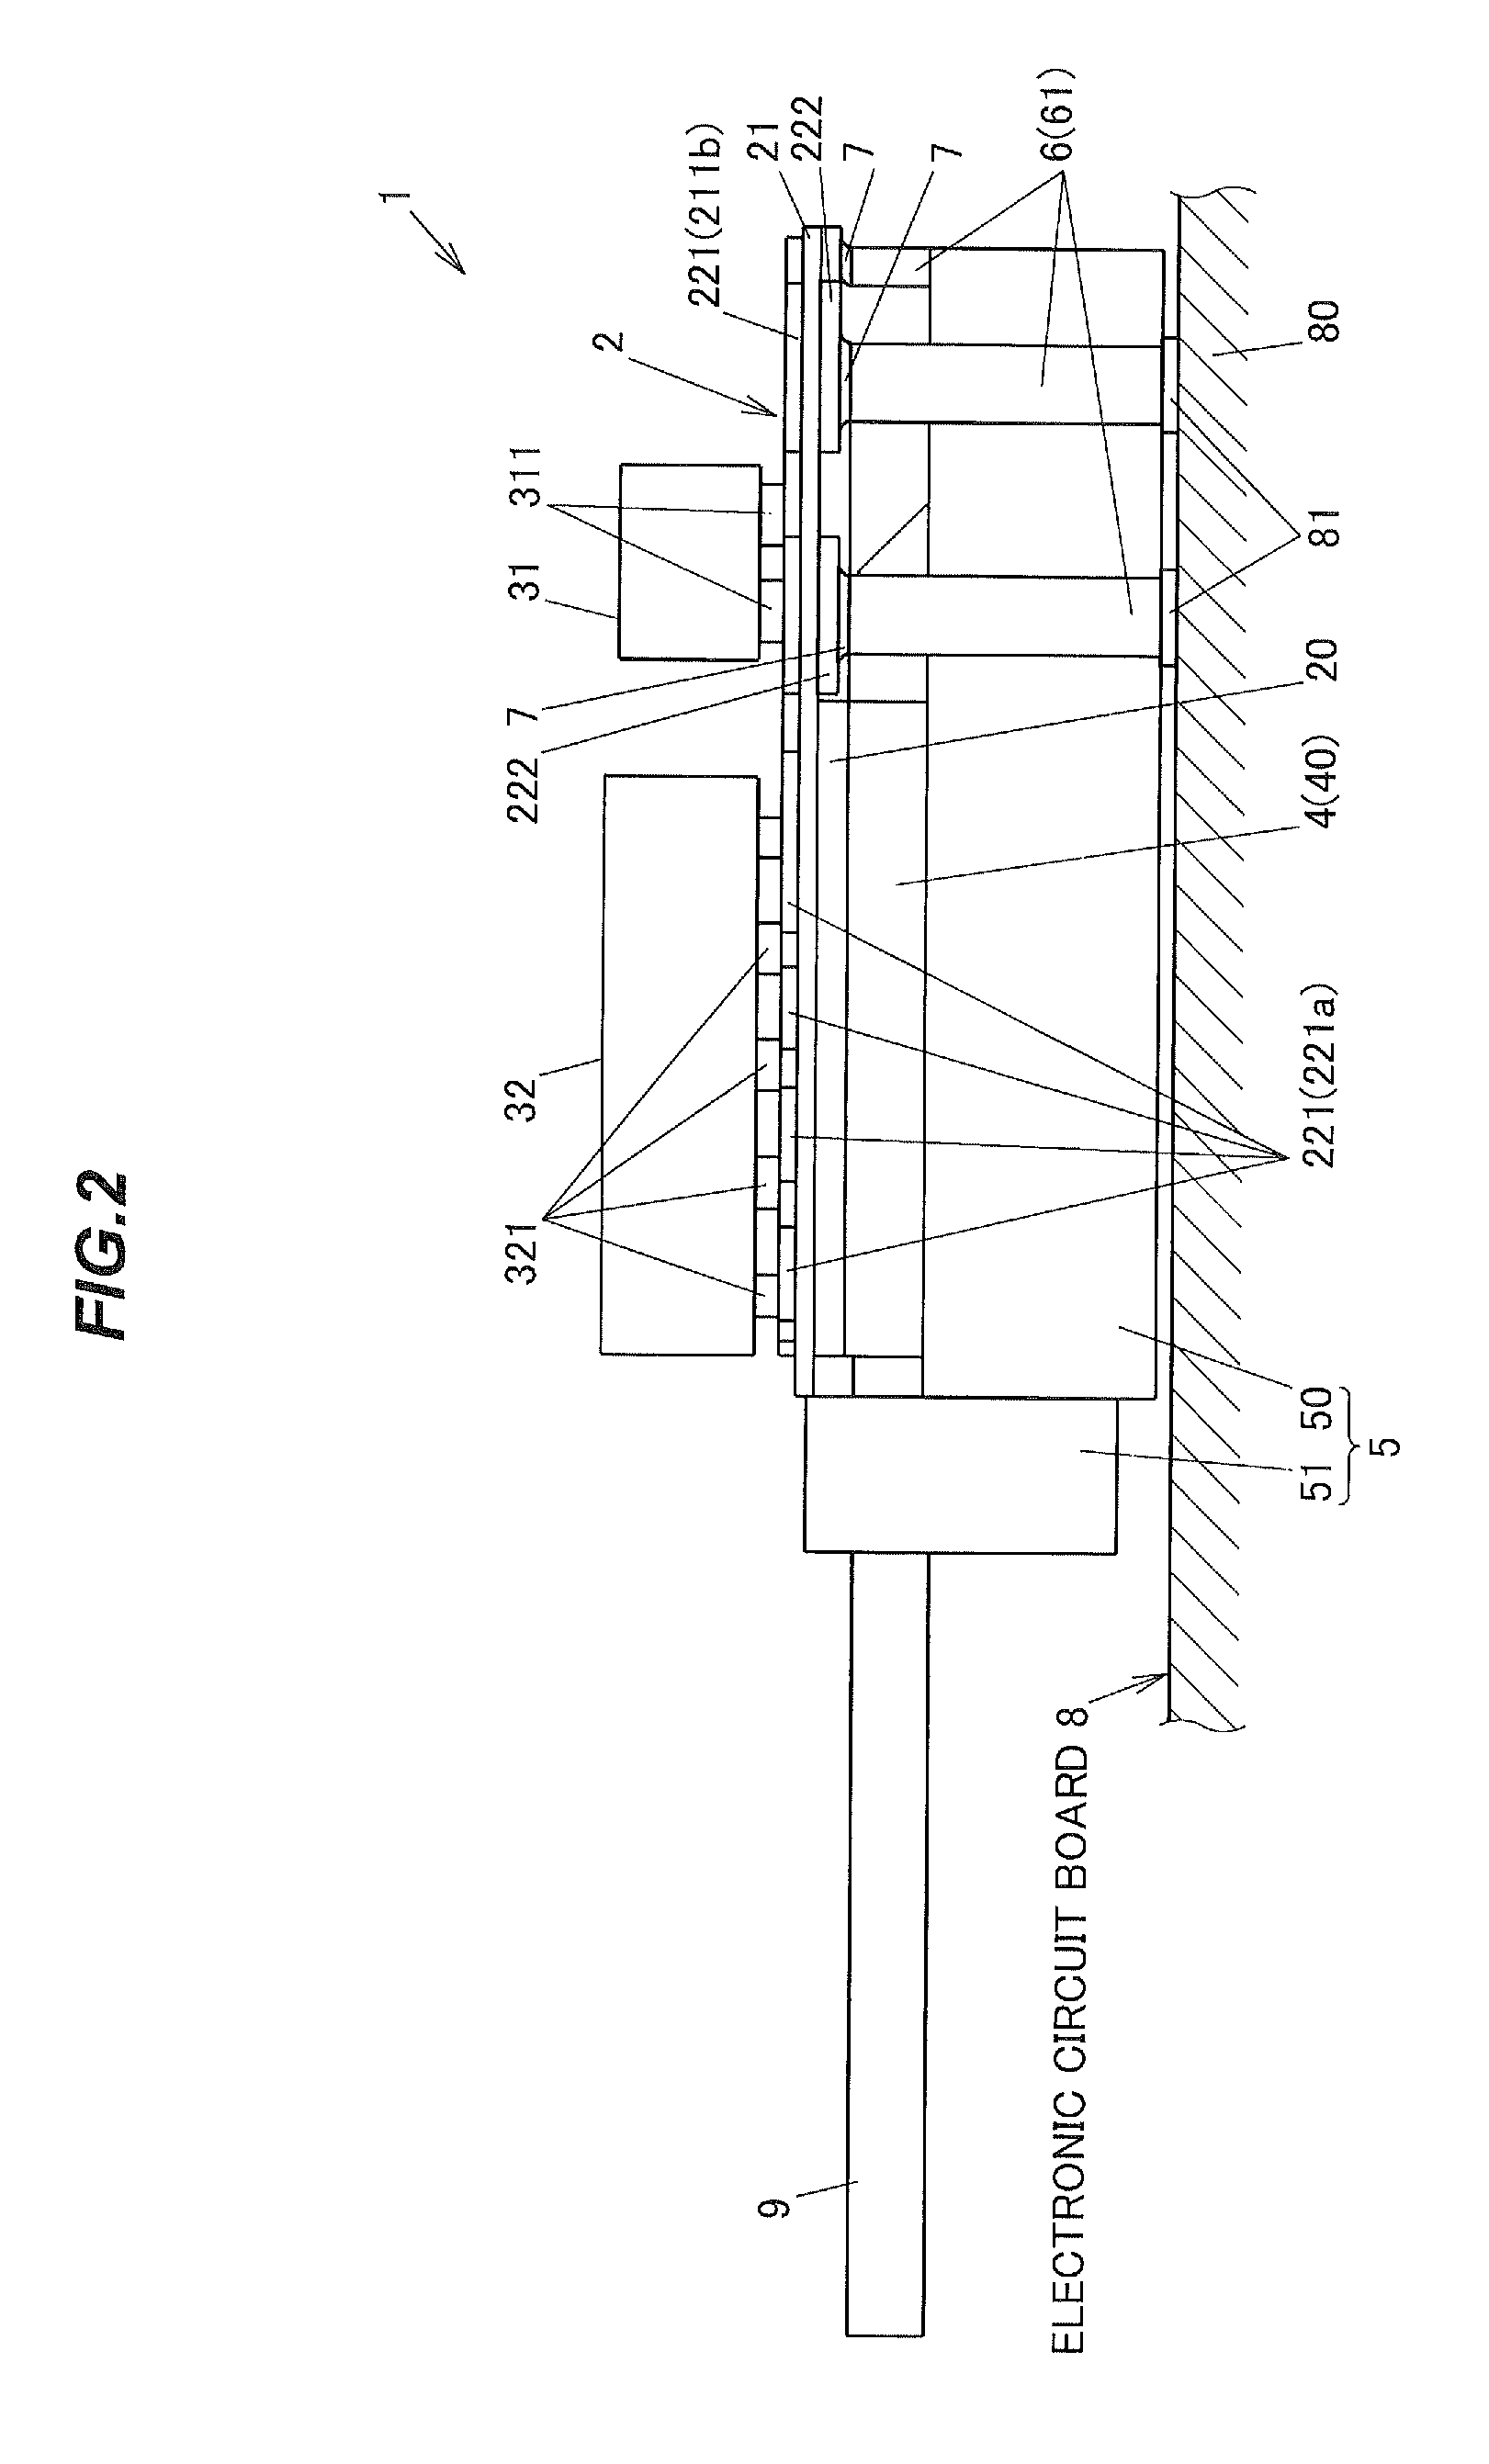 Optical module including photoelectric conversion element and optical coupling member